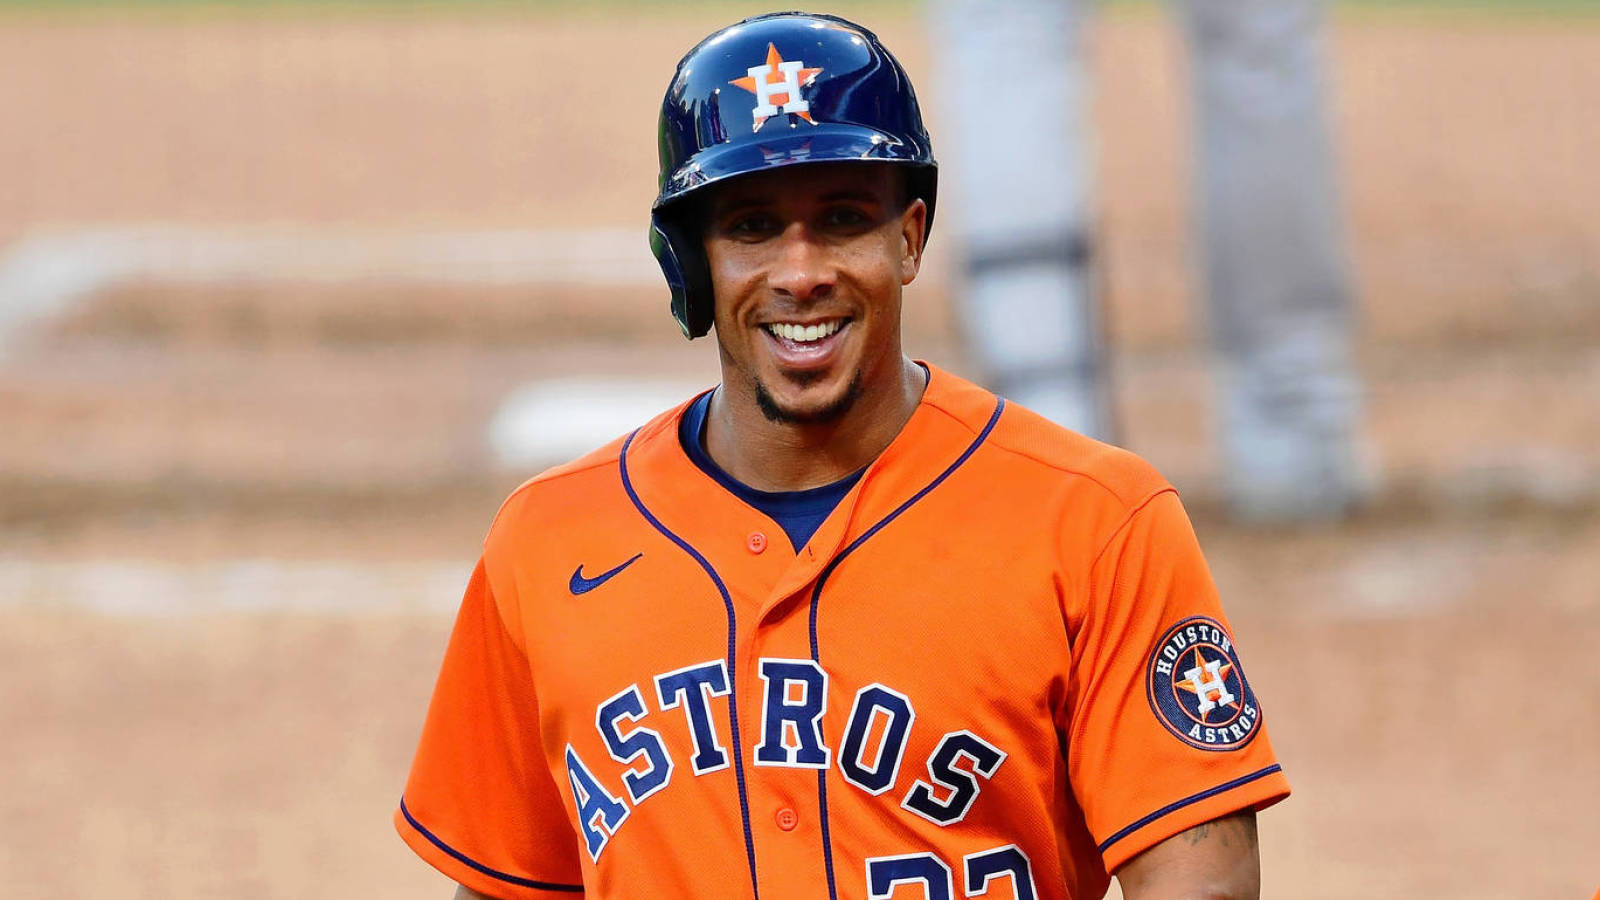 Astros have discussed new deal with Brantley